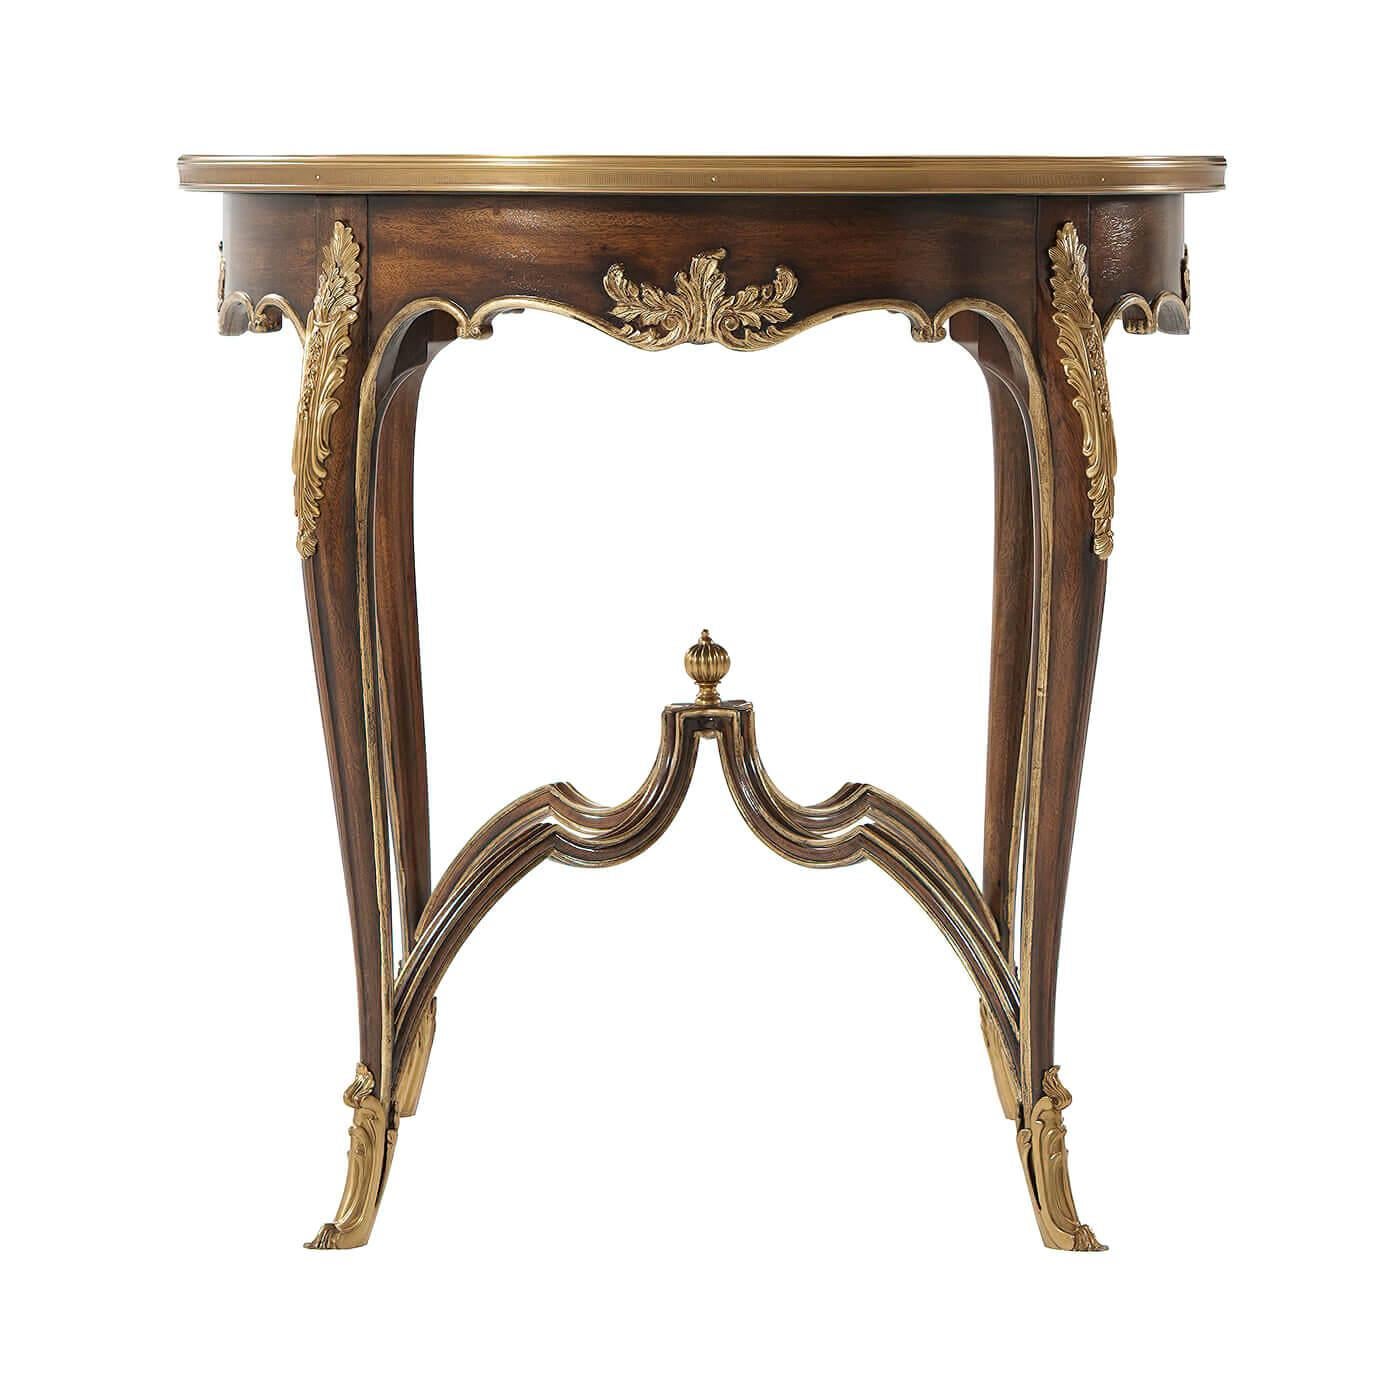 A fine and delicate French Louis XV style mahogany and gilt accent table, the brass bound mother of pearl inlaid and line strung okum veneered top above an undulating hand carved acanthus scroll apron, on slender cabriole legs with fine brass mounts